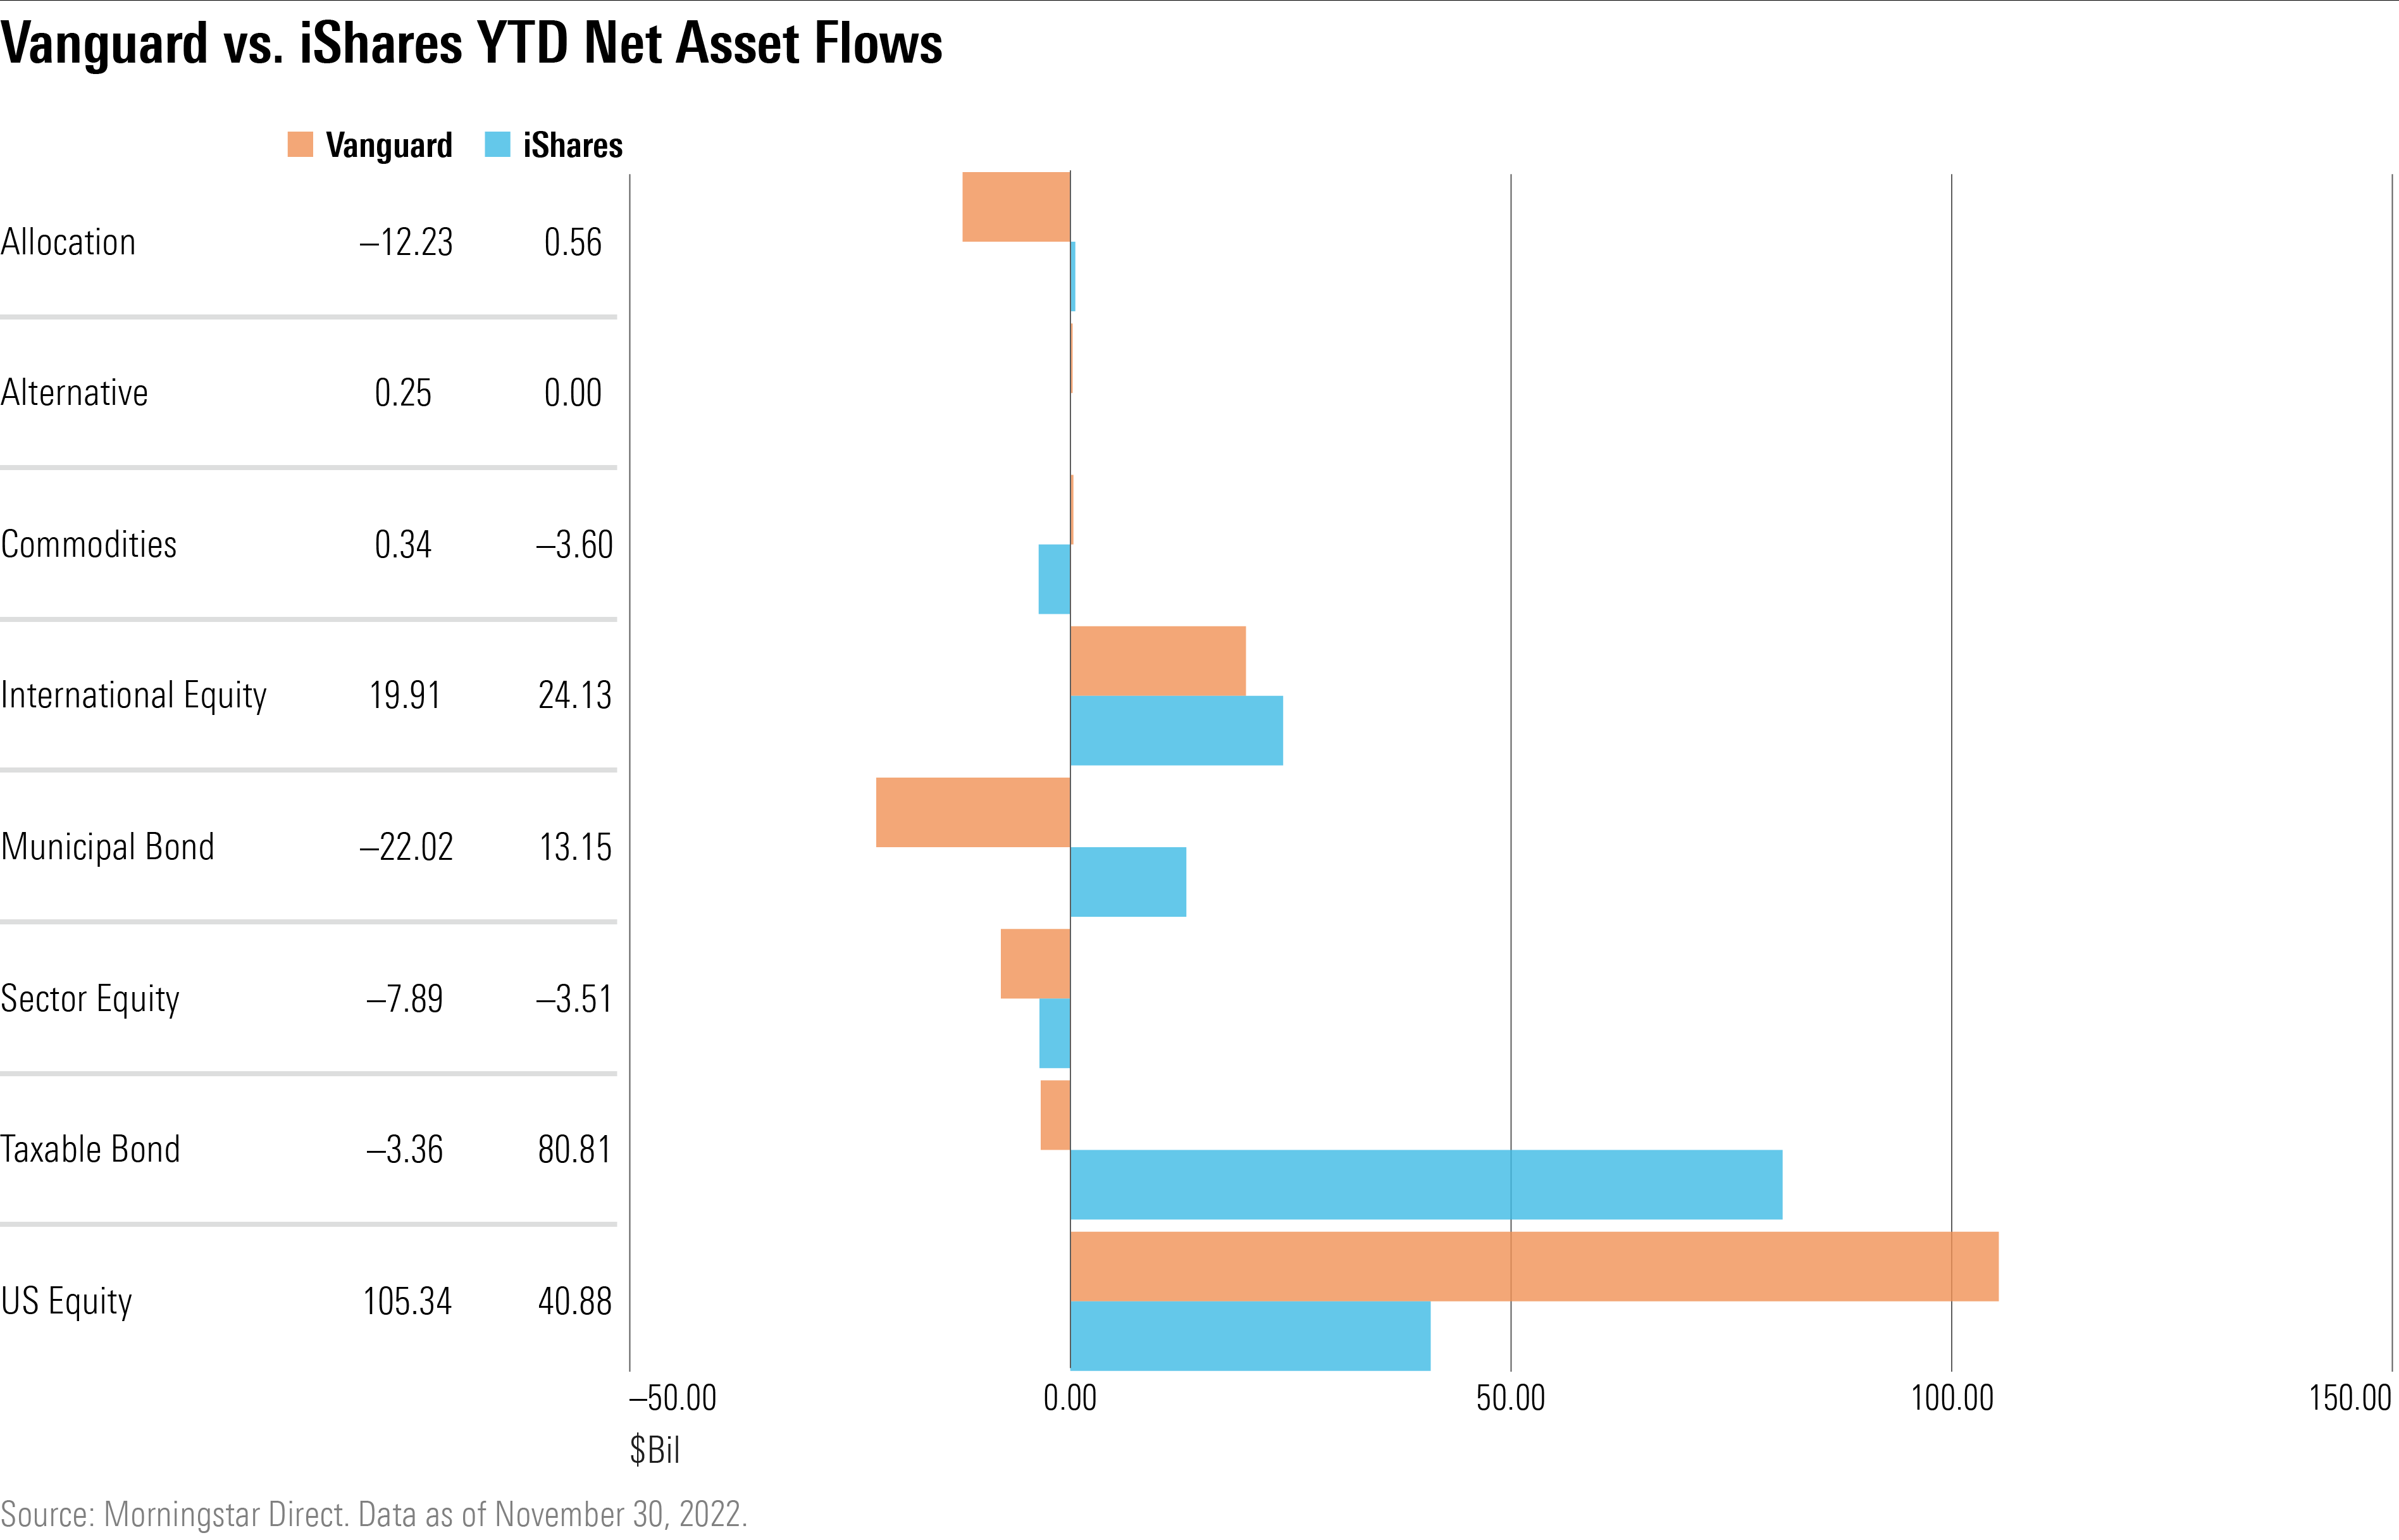 Bar chart showing Vanguard and iShares net asset flows across different categories of funds